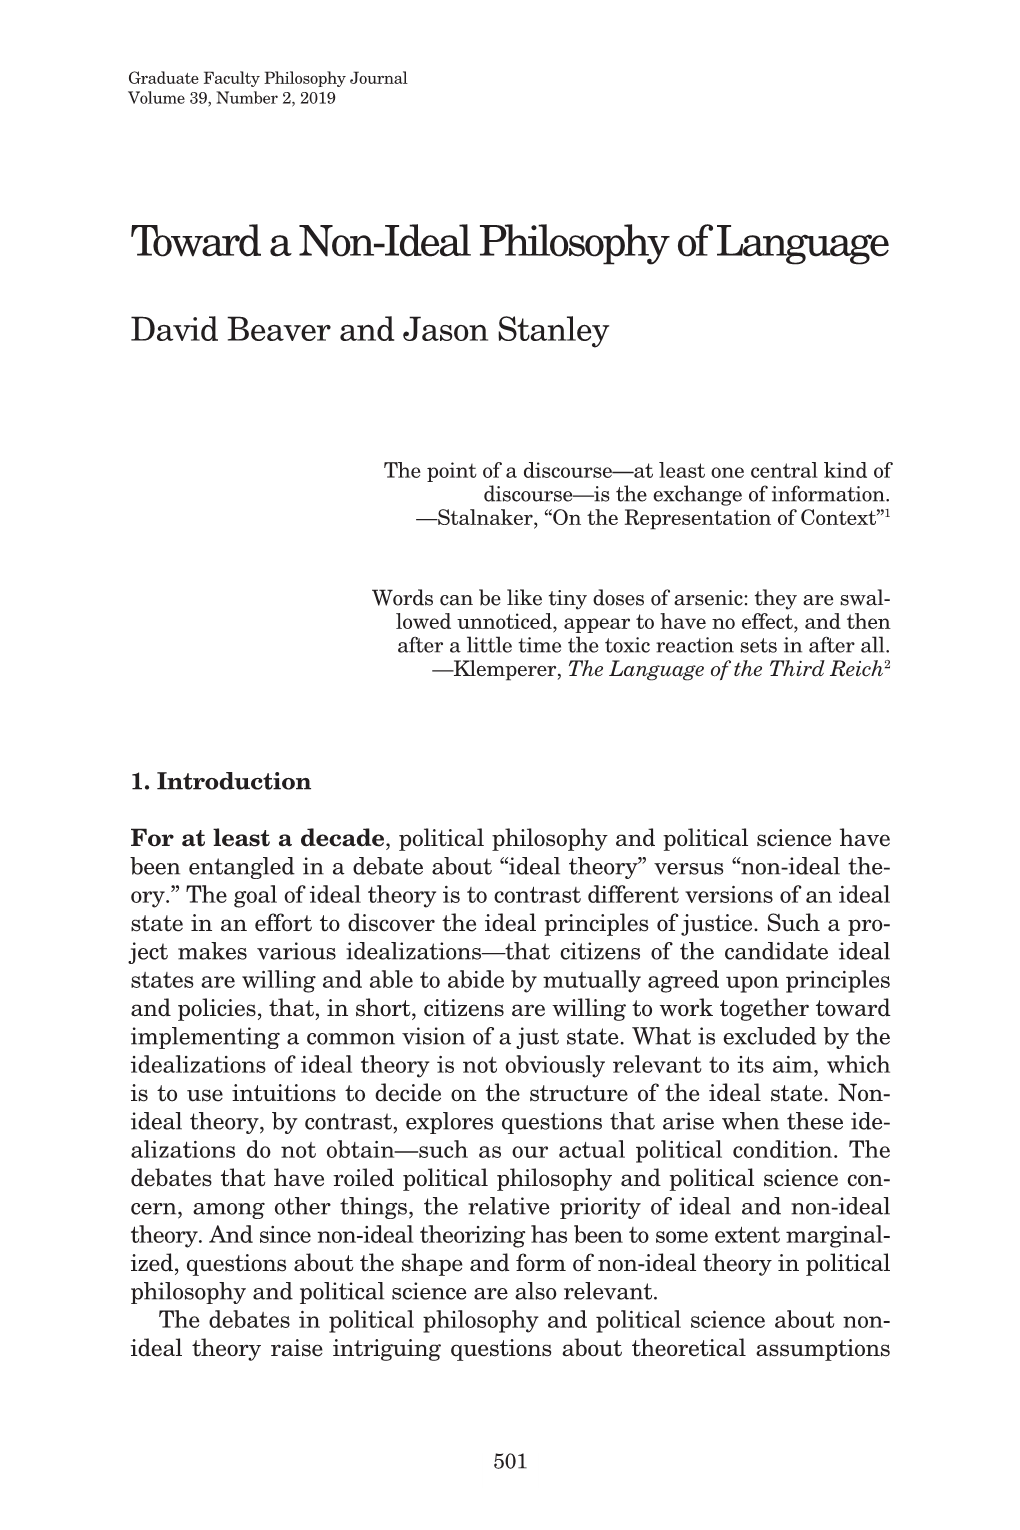 Toward a Non-Ideal Philosophy of Language